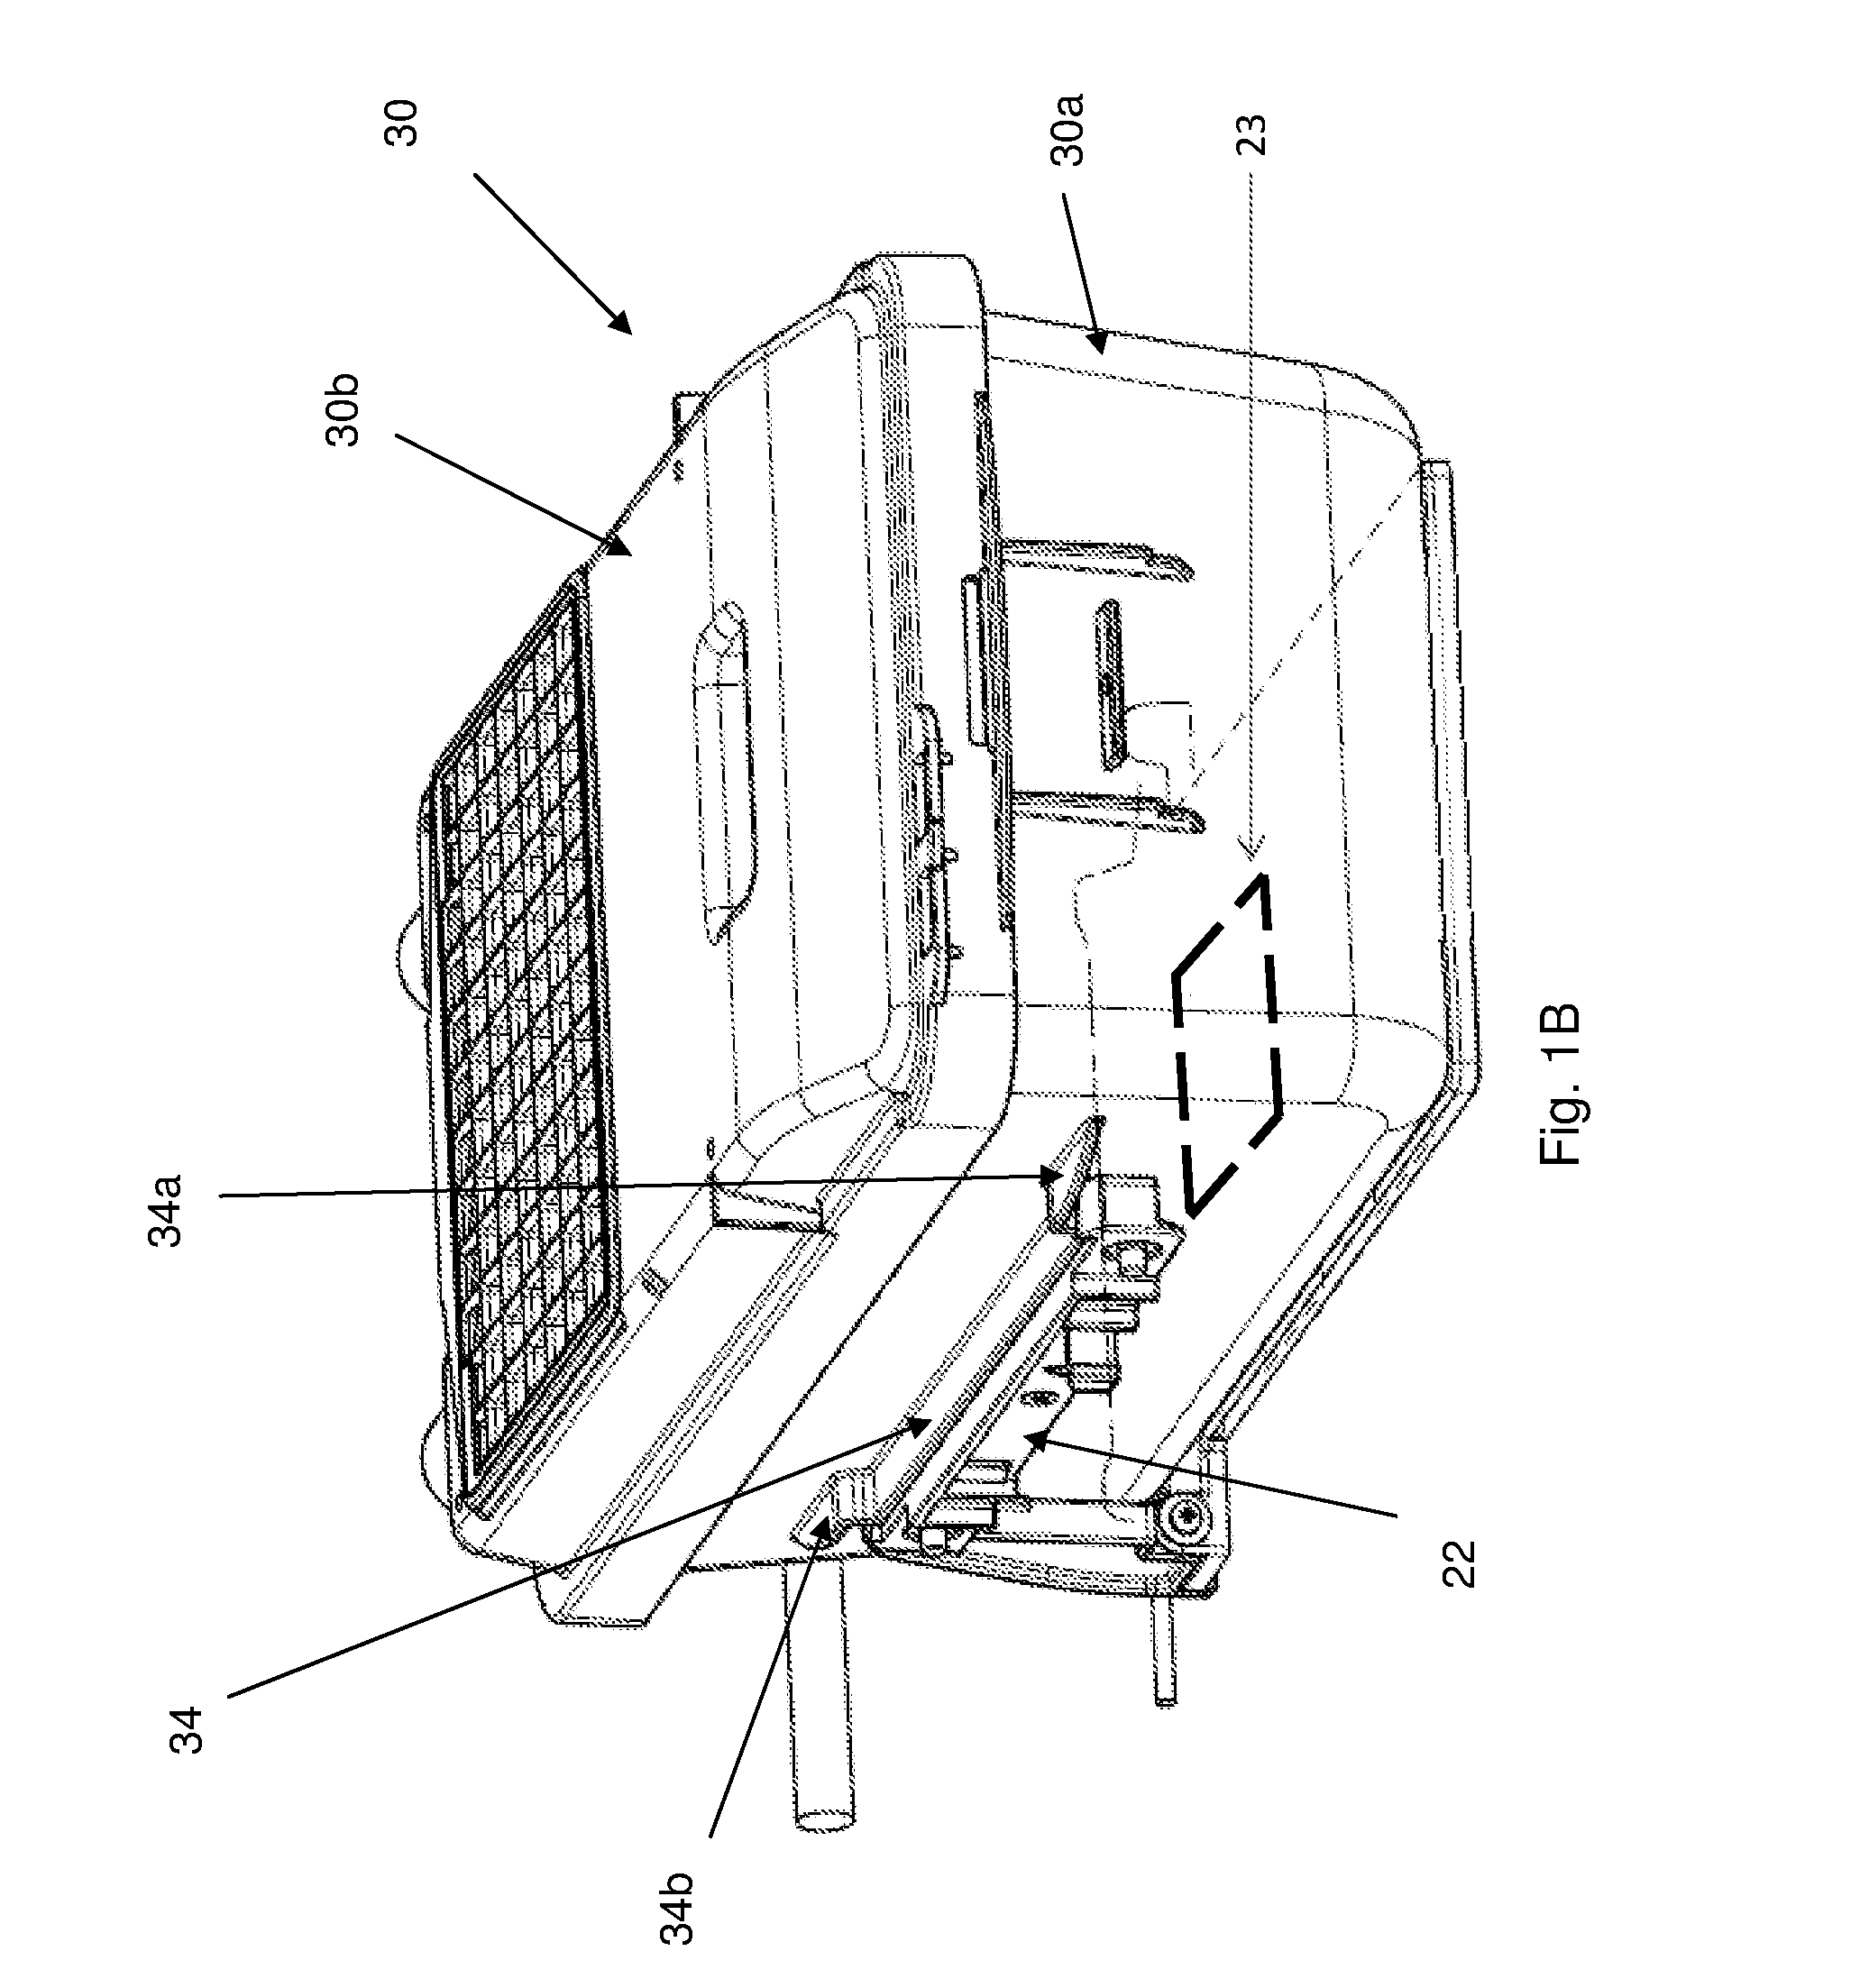 System and method for automatically detecting the presence of cages in the shelf of a facility